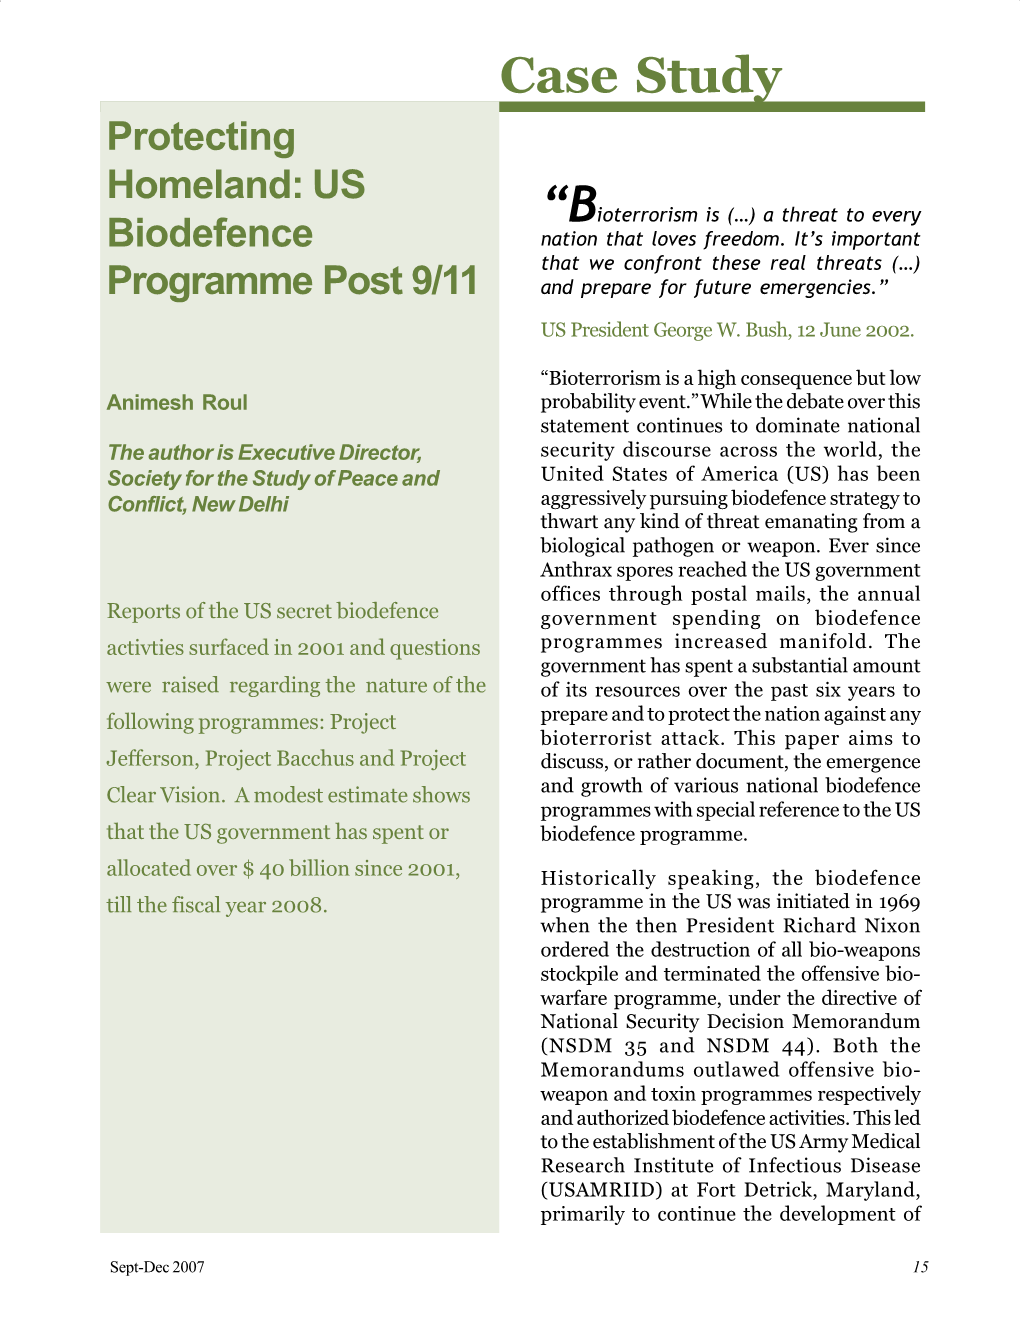 Protecting Homeland: US “Bioterrorism Is (…) a Threat to Every Biodefence Nation That Loves Freedom